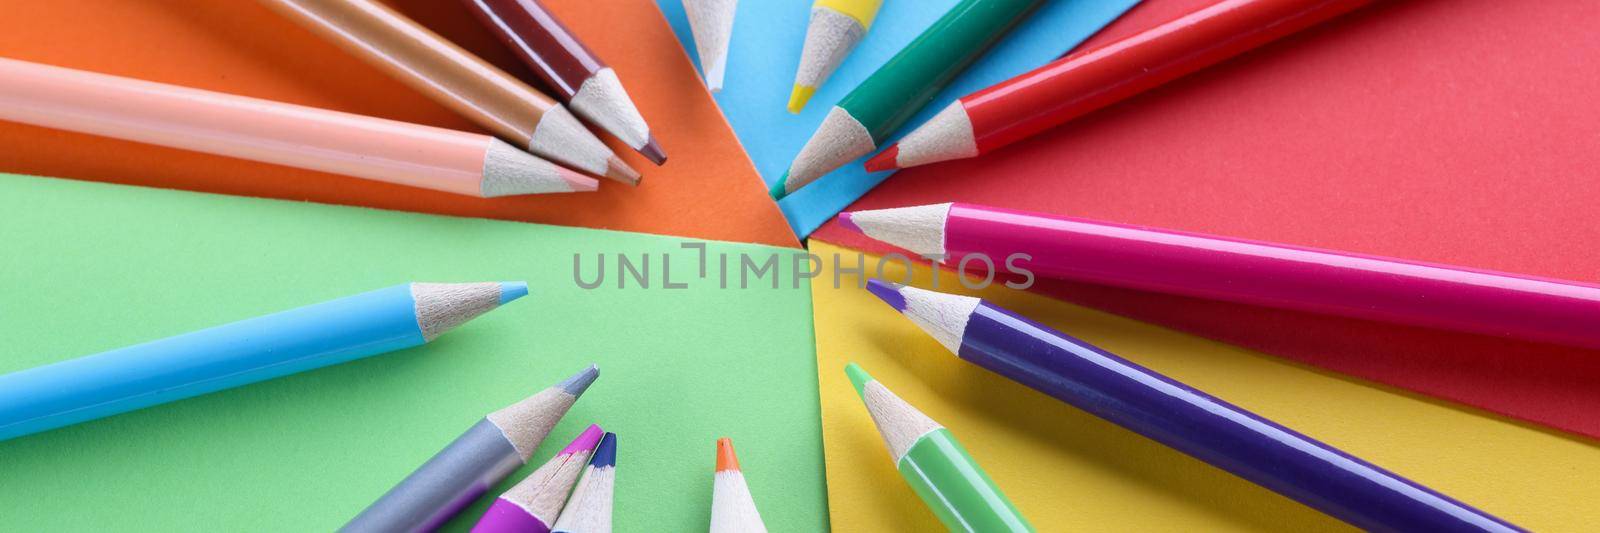 Lot of sharp wooden pencils lying on multicolored background closeup by kuprevich